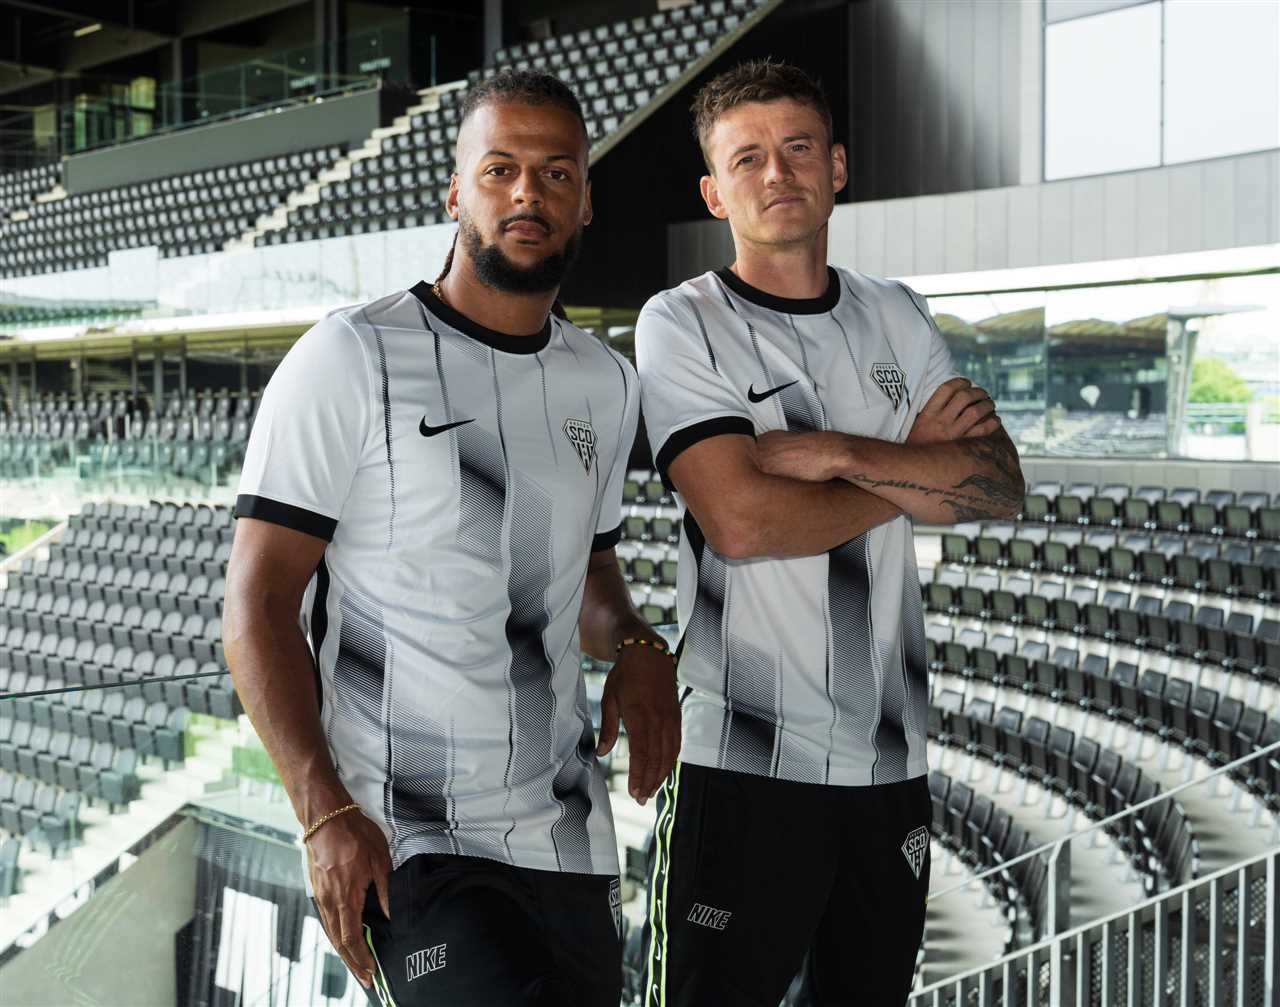 Maillots angers sco